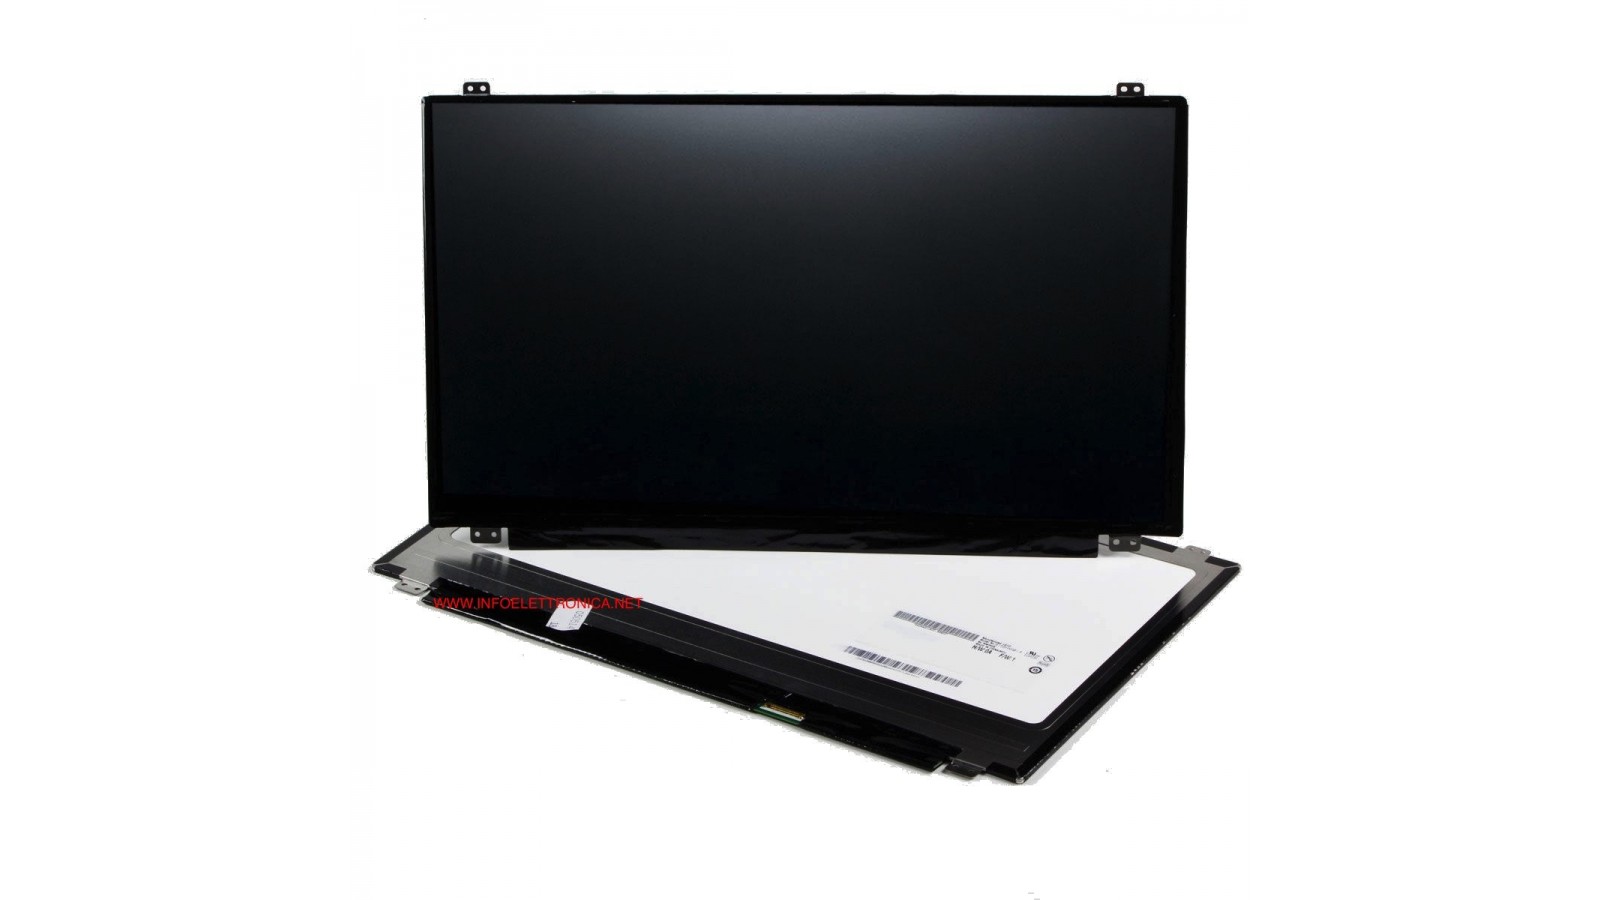 Display LCD Schermo 15,6 Led compatibile con Asus N550JK Full Hd